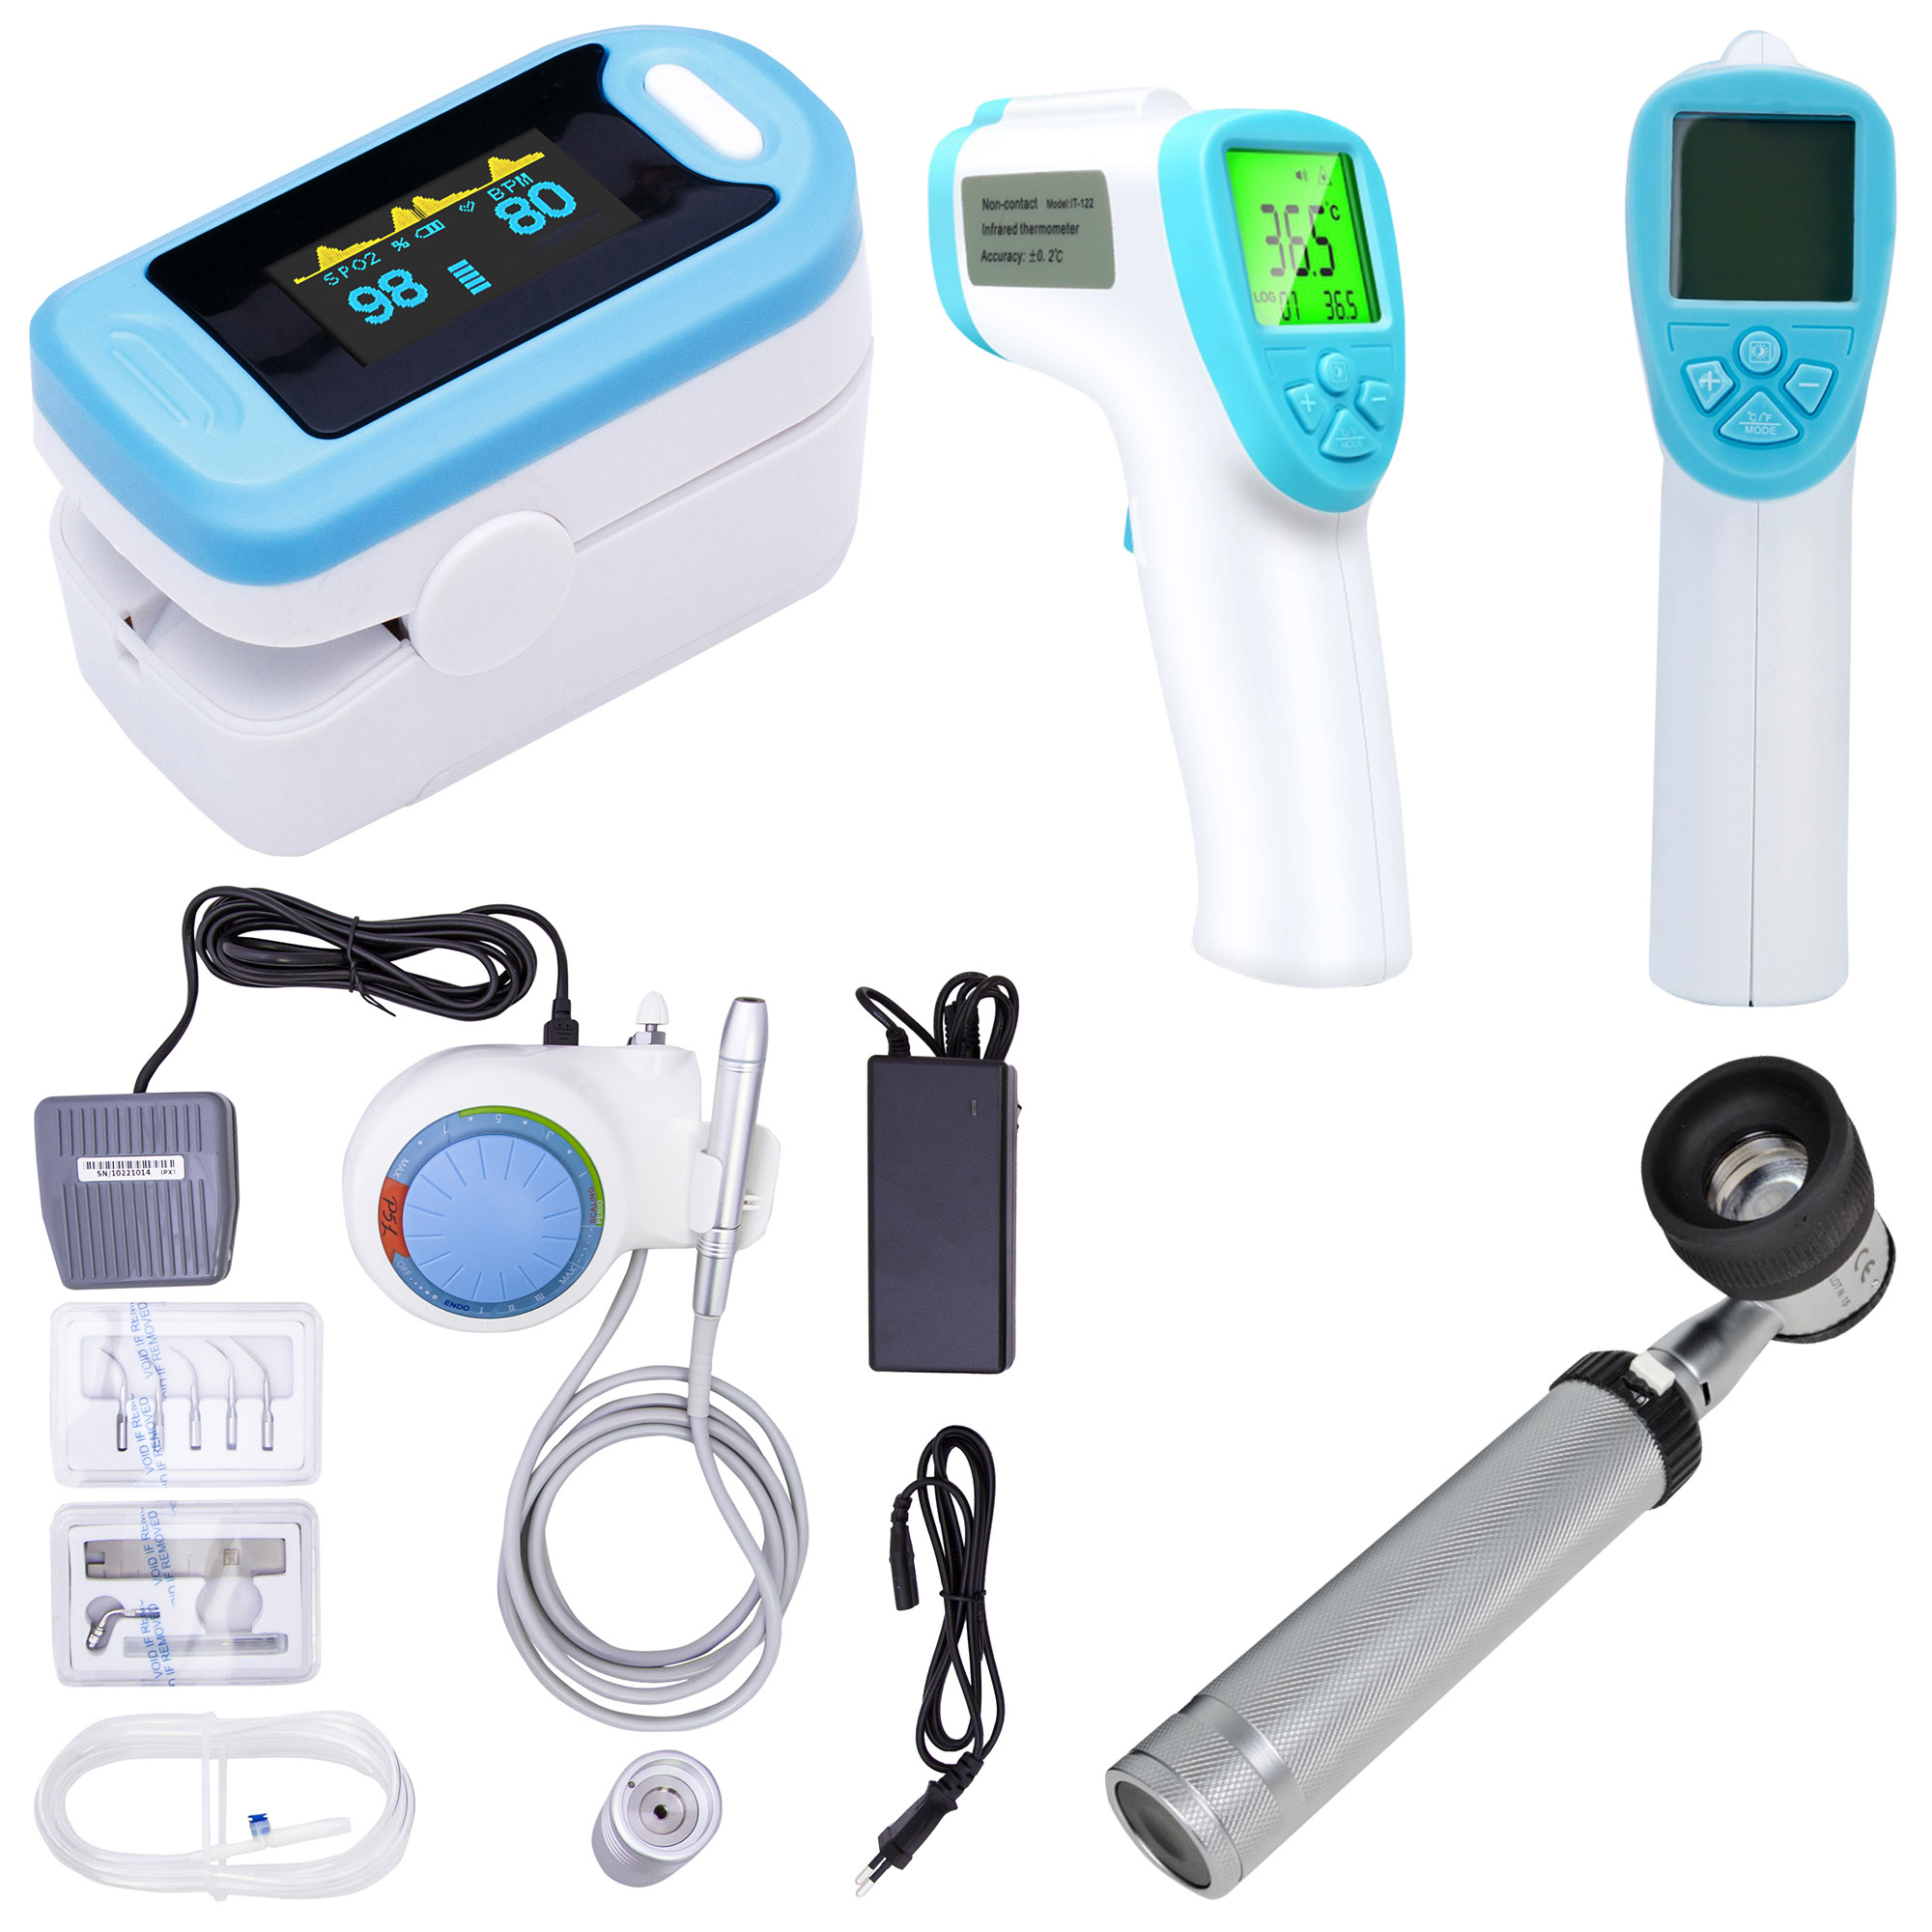 Medical practice/HEALTH MONITORING DEVICES/Medical Equipment & Devices